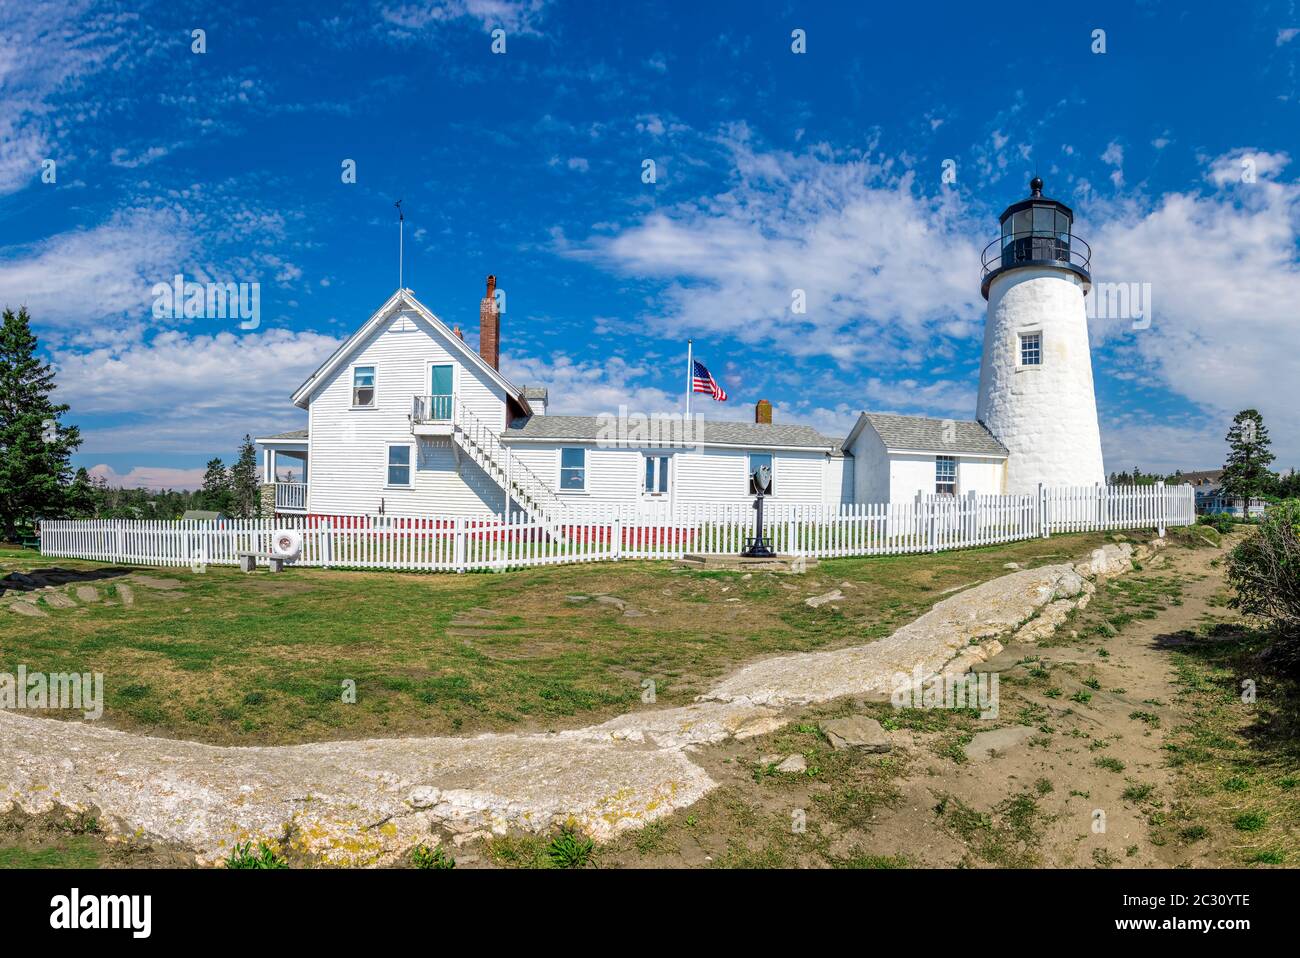 Pemaquid Point Lighthouse, Maine, USA Banque D'Images